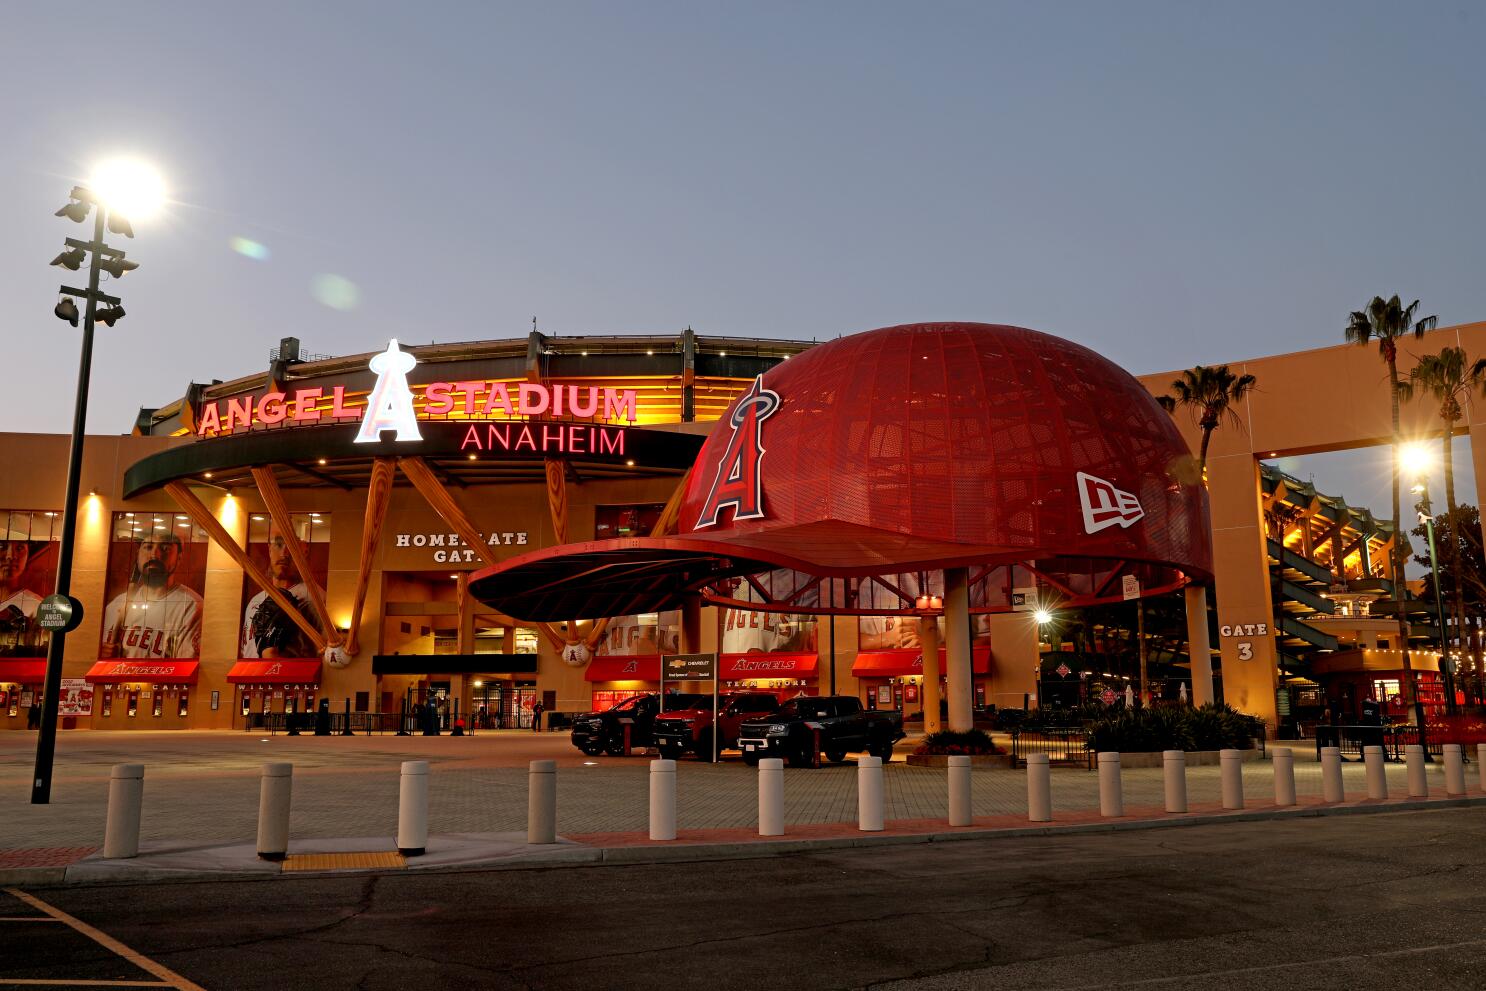 Q&A: With the Angel Stadium sale axed, what are the Angels' long